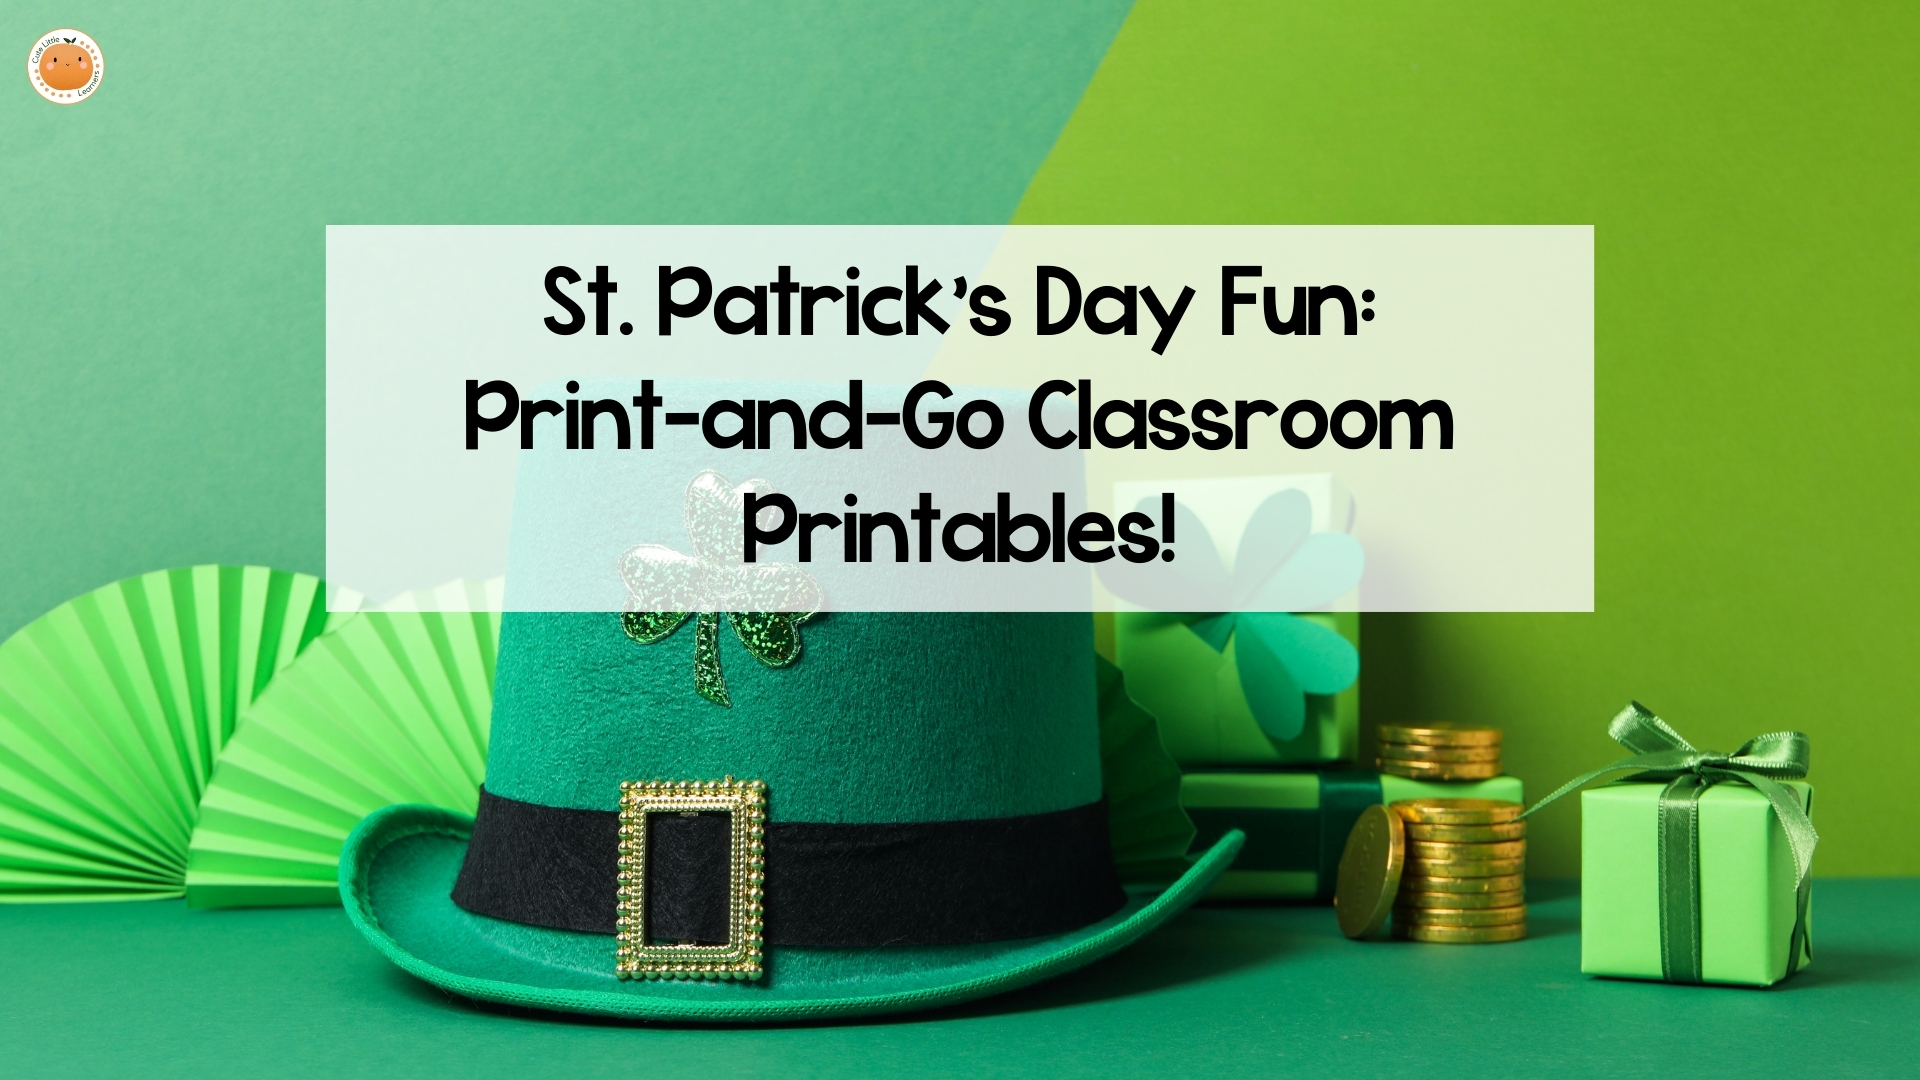 St. Patrick's Day Fun: Print-and-Go Classroom Printables!